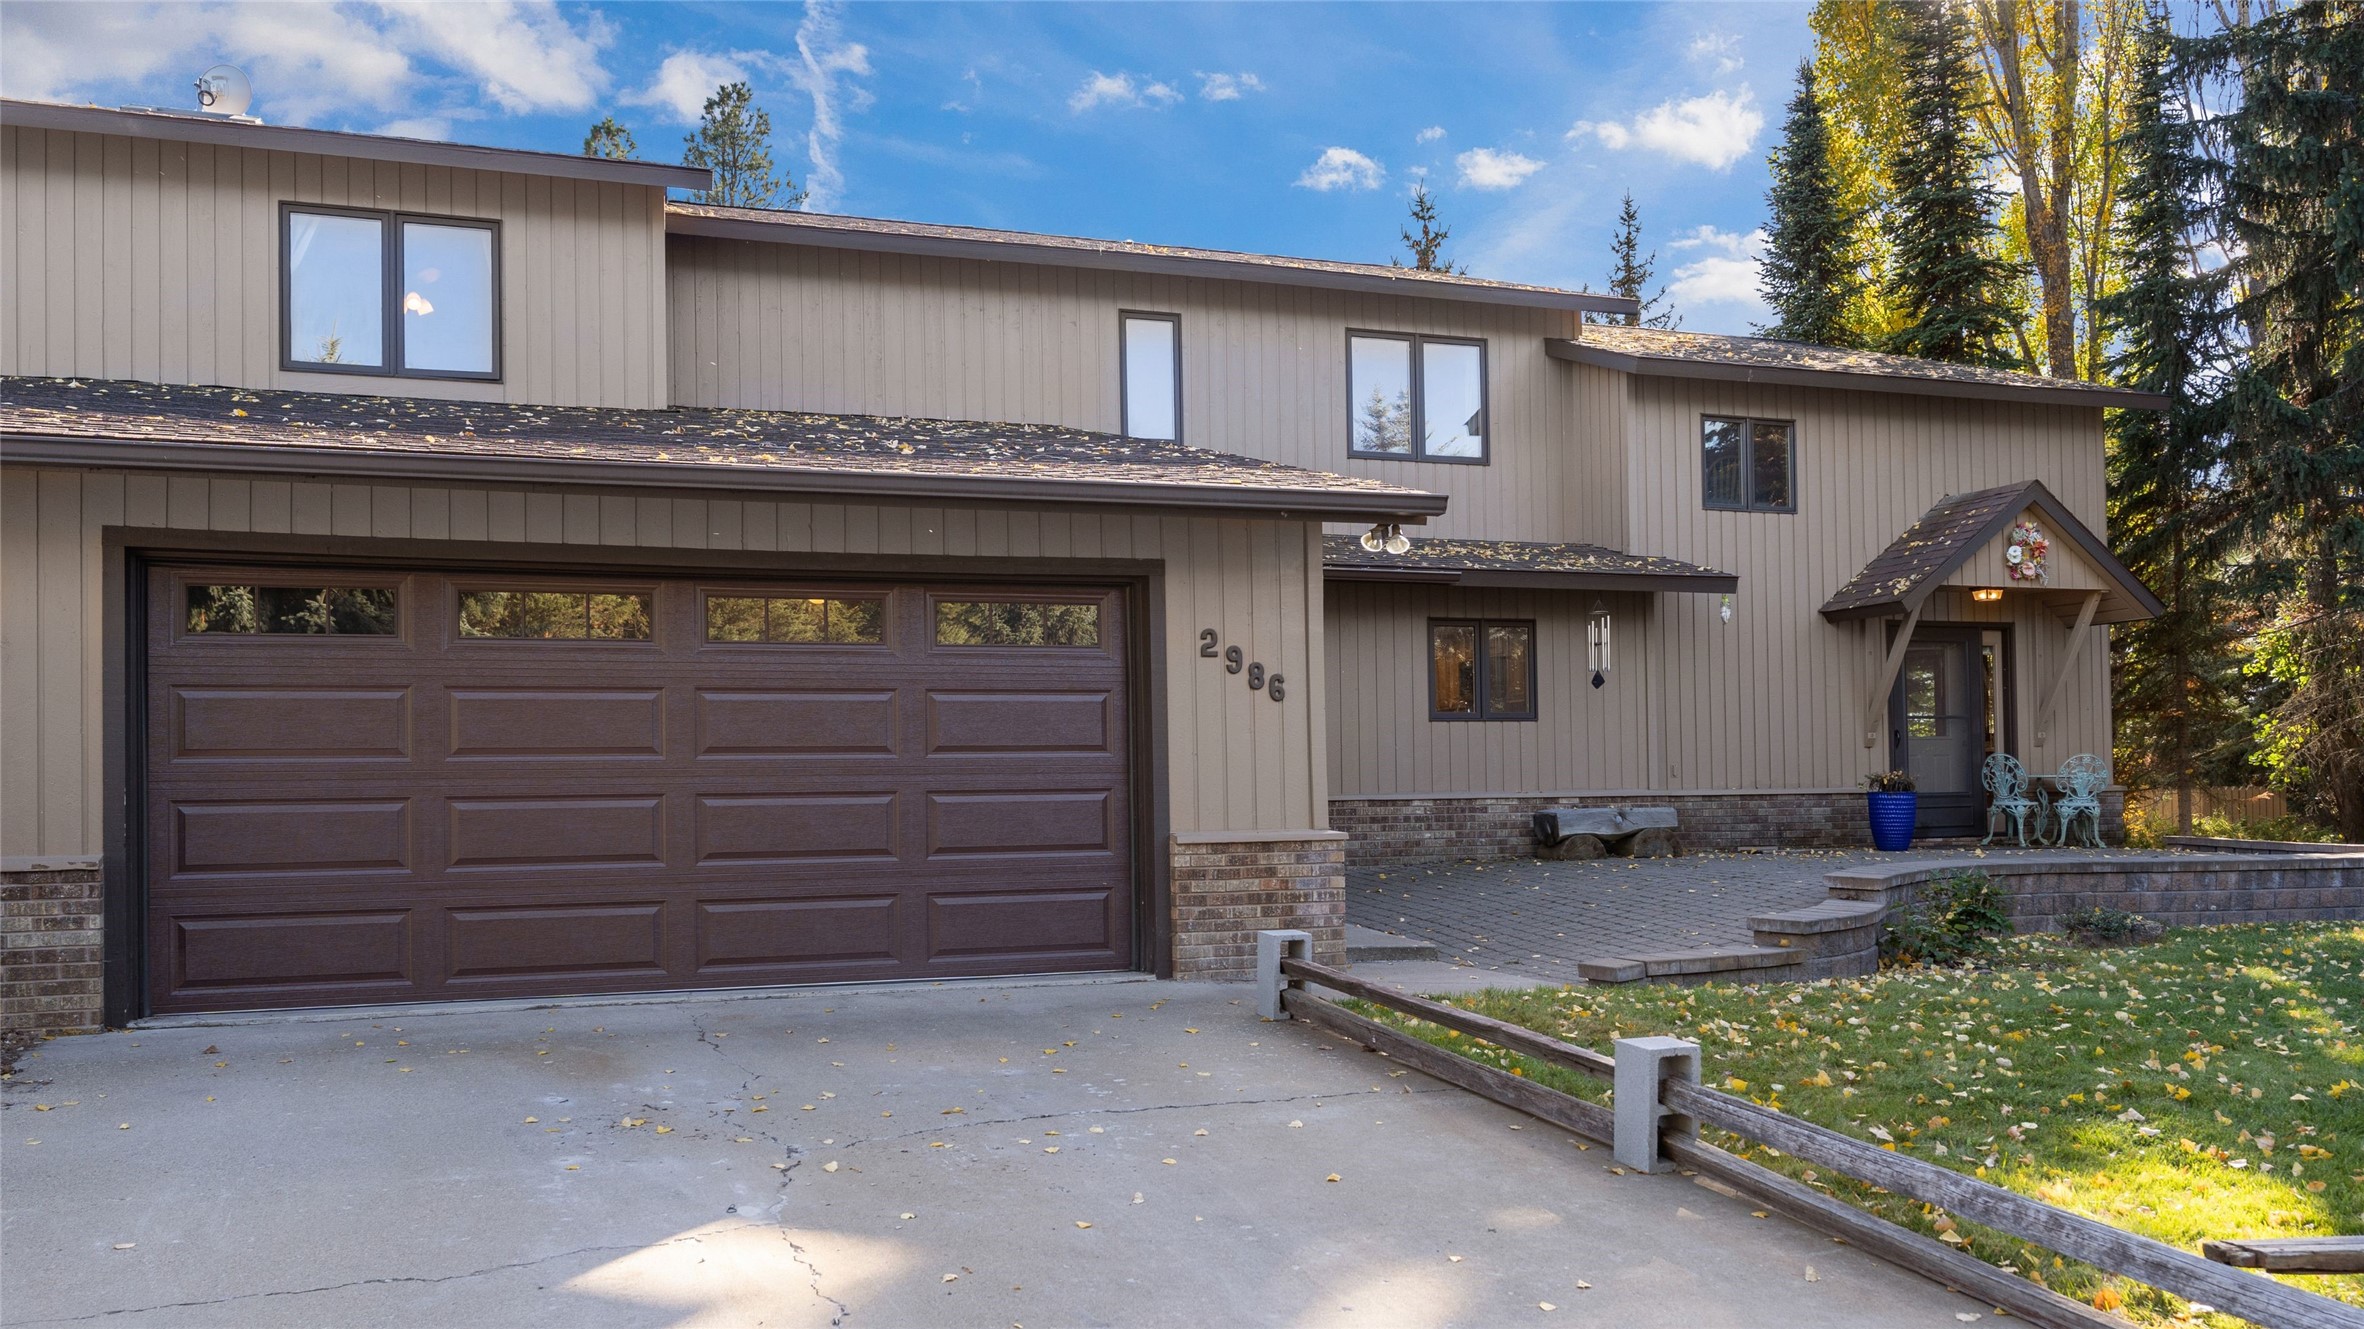 Wow, if you are seeking tranquility close to town you will love this townhome on a rare 1/2 acre+ lot off of Whitefish Stage Road. This home is conveniently located between Kalispell and Whitefish with private community access to Whitefish River. This home features a wood burning fireplace, wood burning stove, and a newly installed heat pump offering multiple heat sources for the Winter months. The main kitchen has been beautifully remodeled and opens to your vaulted dining room and living space featuring tongue and groove ceilings. You will enjoy the convenience of the attached oversized 2 car garage for your seasonal toys along with the additional parking pad for your RV or boat. While labeled as a condo in county records, this home and HOA operate similar to a townhome with minimal dues and individual responsibility for maintenance. Call Janet Cantrell at 406-890-5390 or your real estate professional.